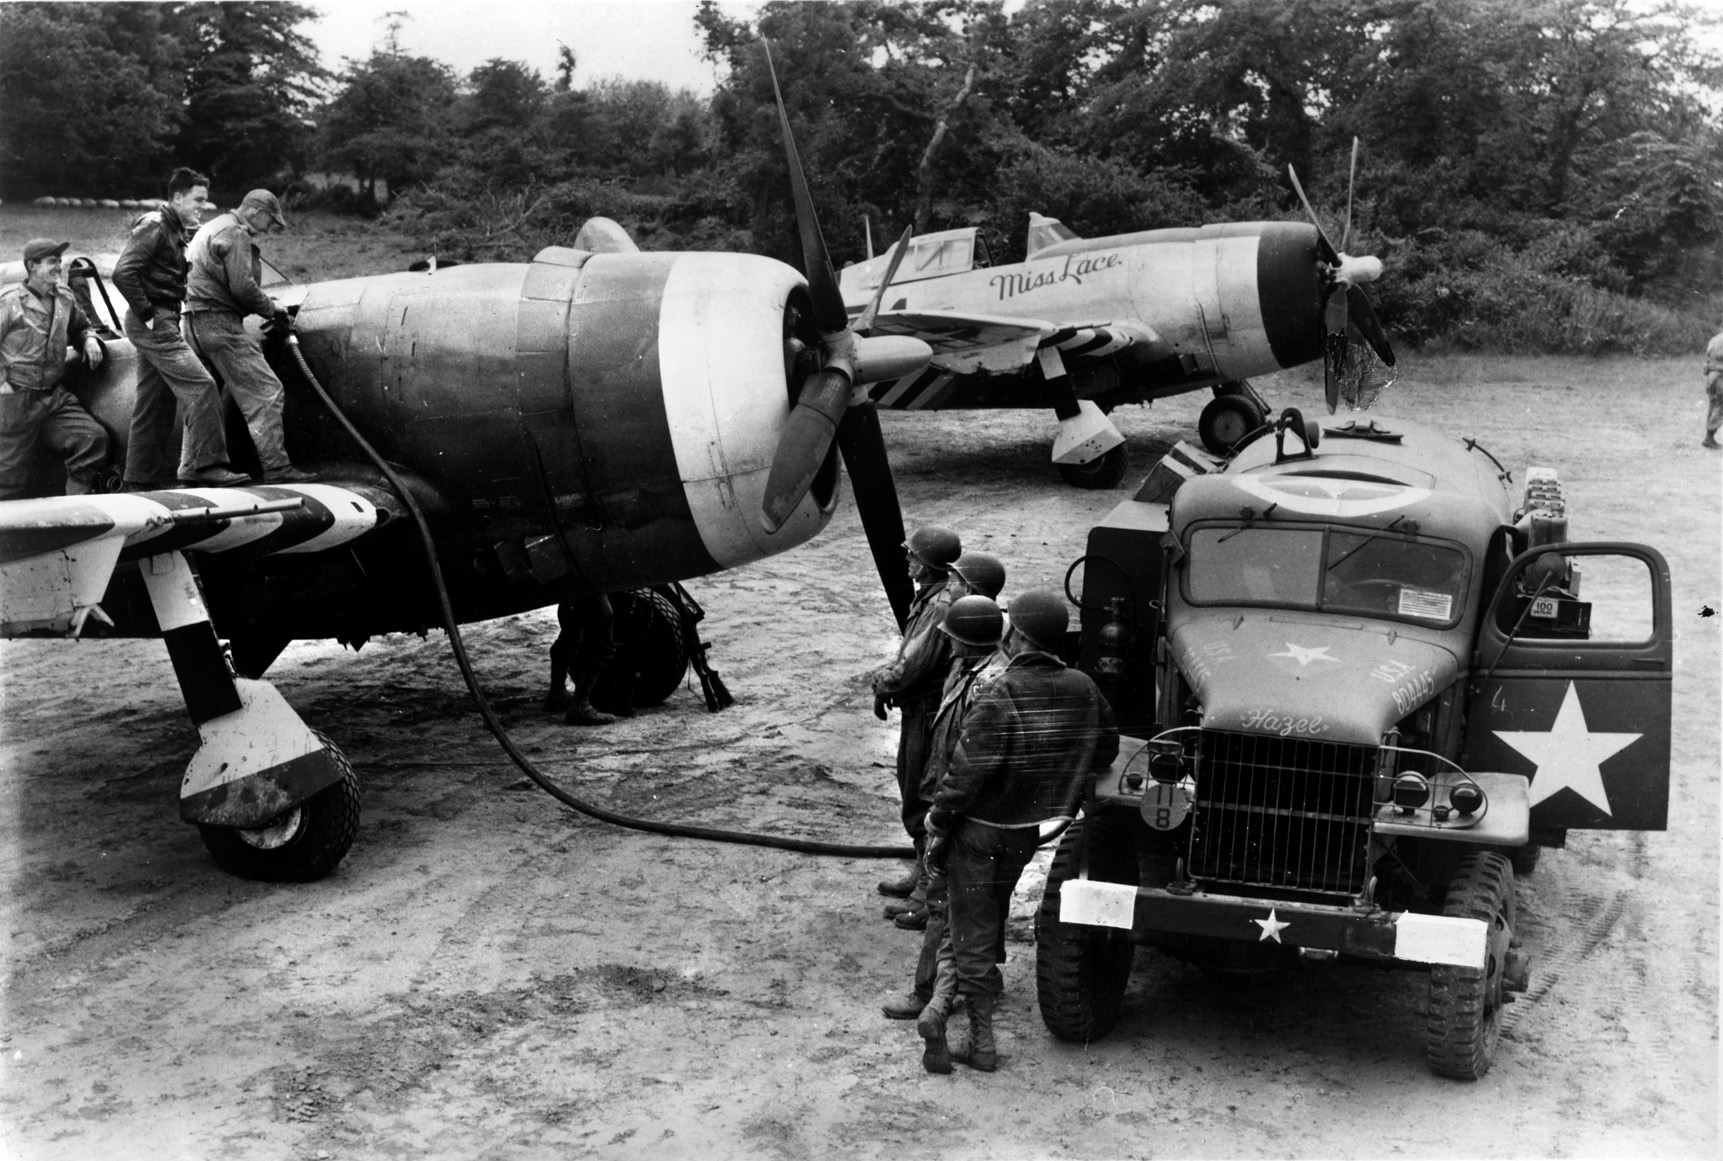 After a week in England, Ed’s squadron was relocated to France in September 1944. Here a couple of P-47s of the 48th Fighter Group are being refueled by a Ninth Air Force ground crew at an airfield in France. 